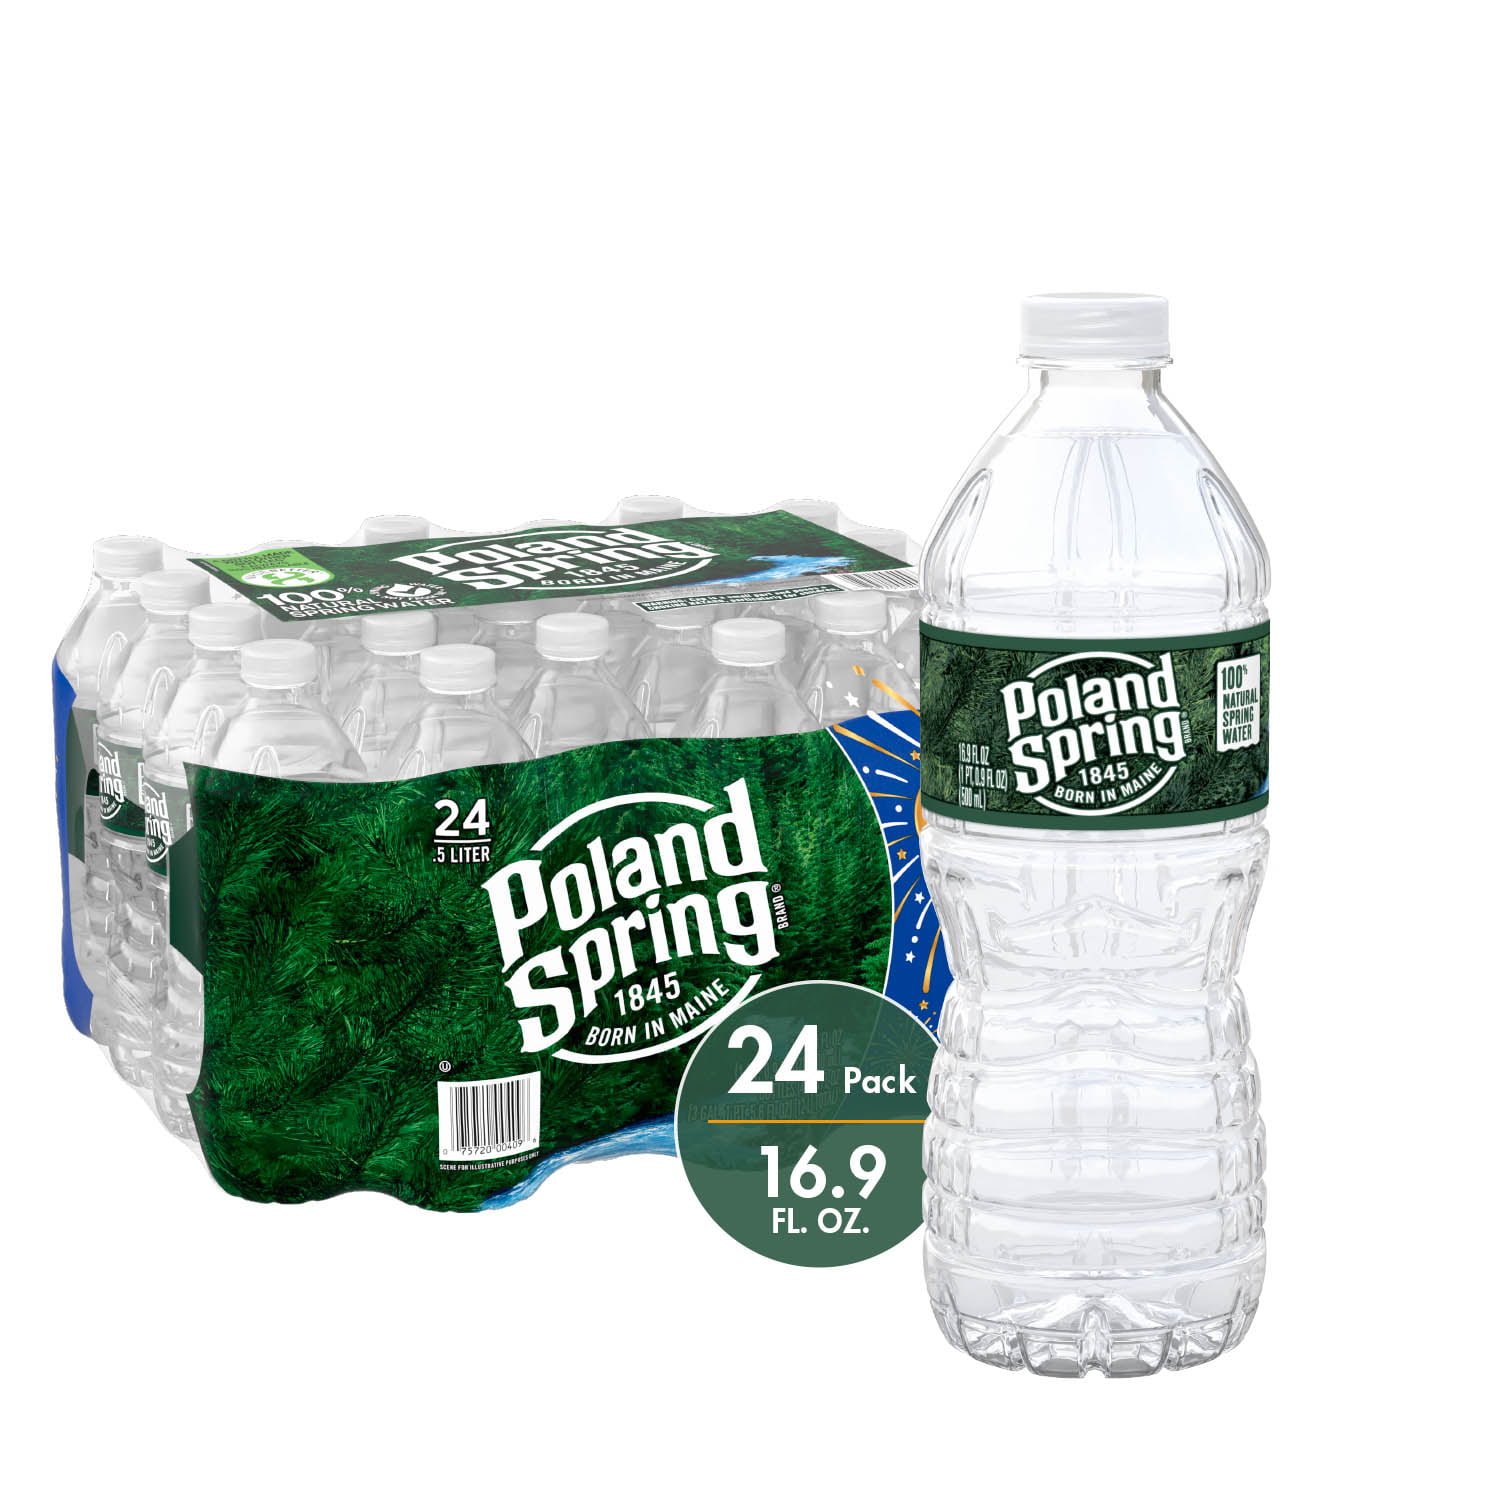 POLAND SPRING Brand 100 Natural Spring Water, 16.9ounce